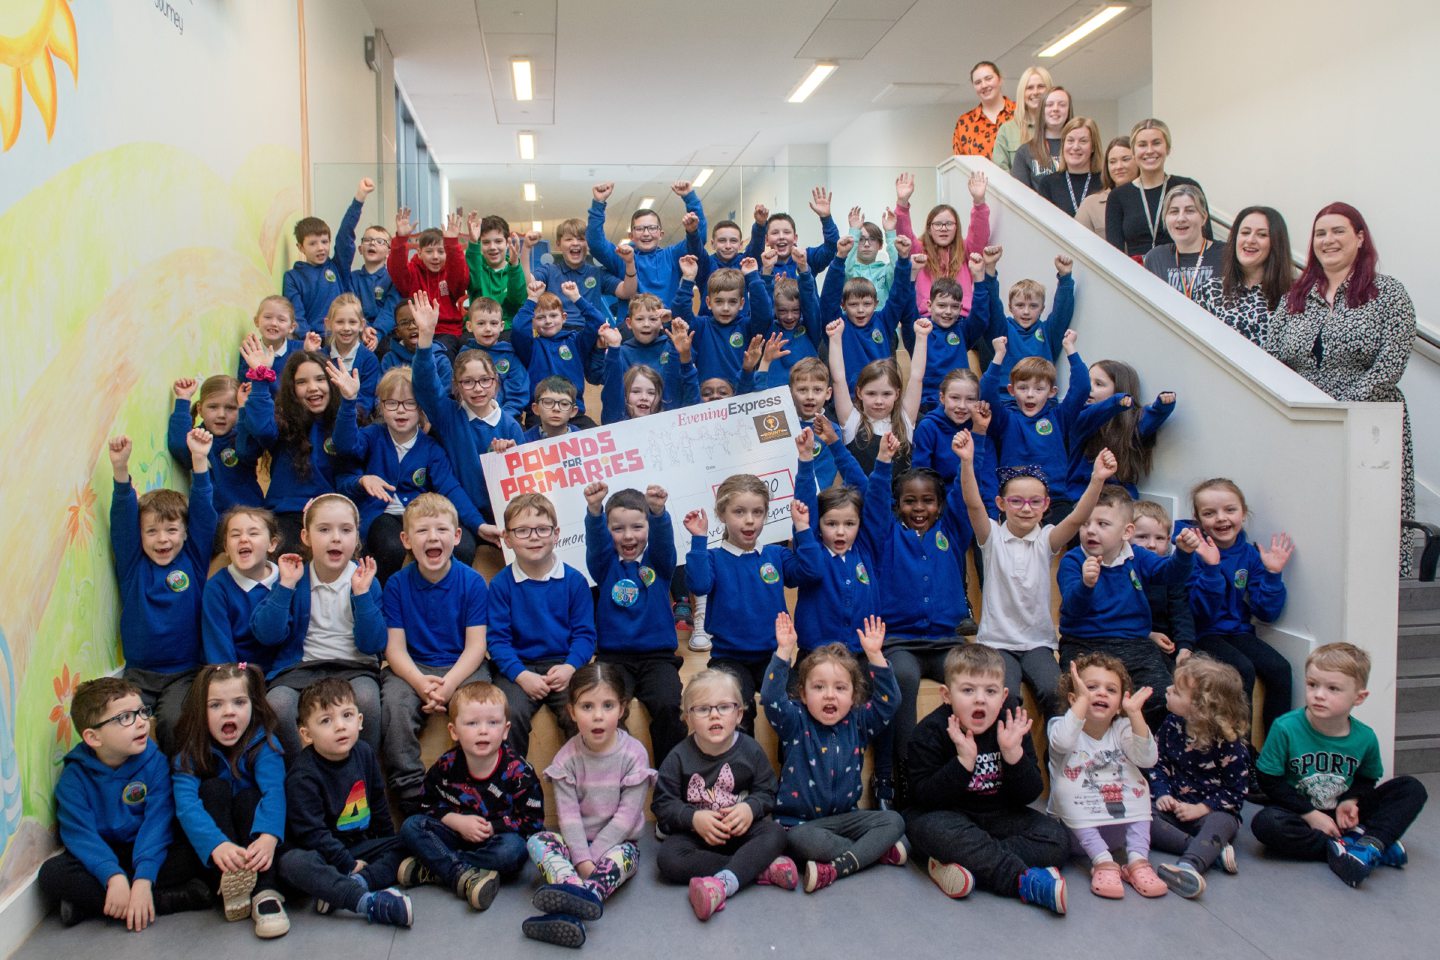 Pounds for Primaries winners from Brimmond school celebrate with their £2,000 cheque in the hallway.